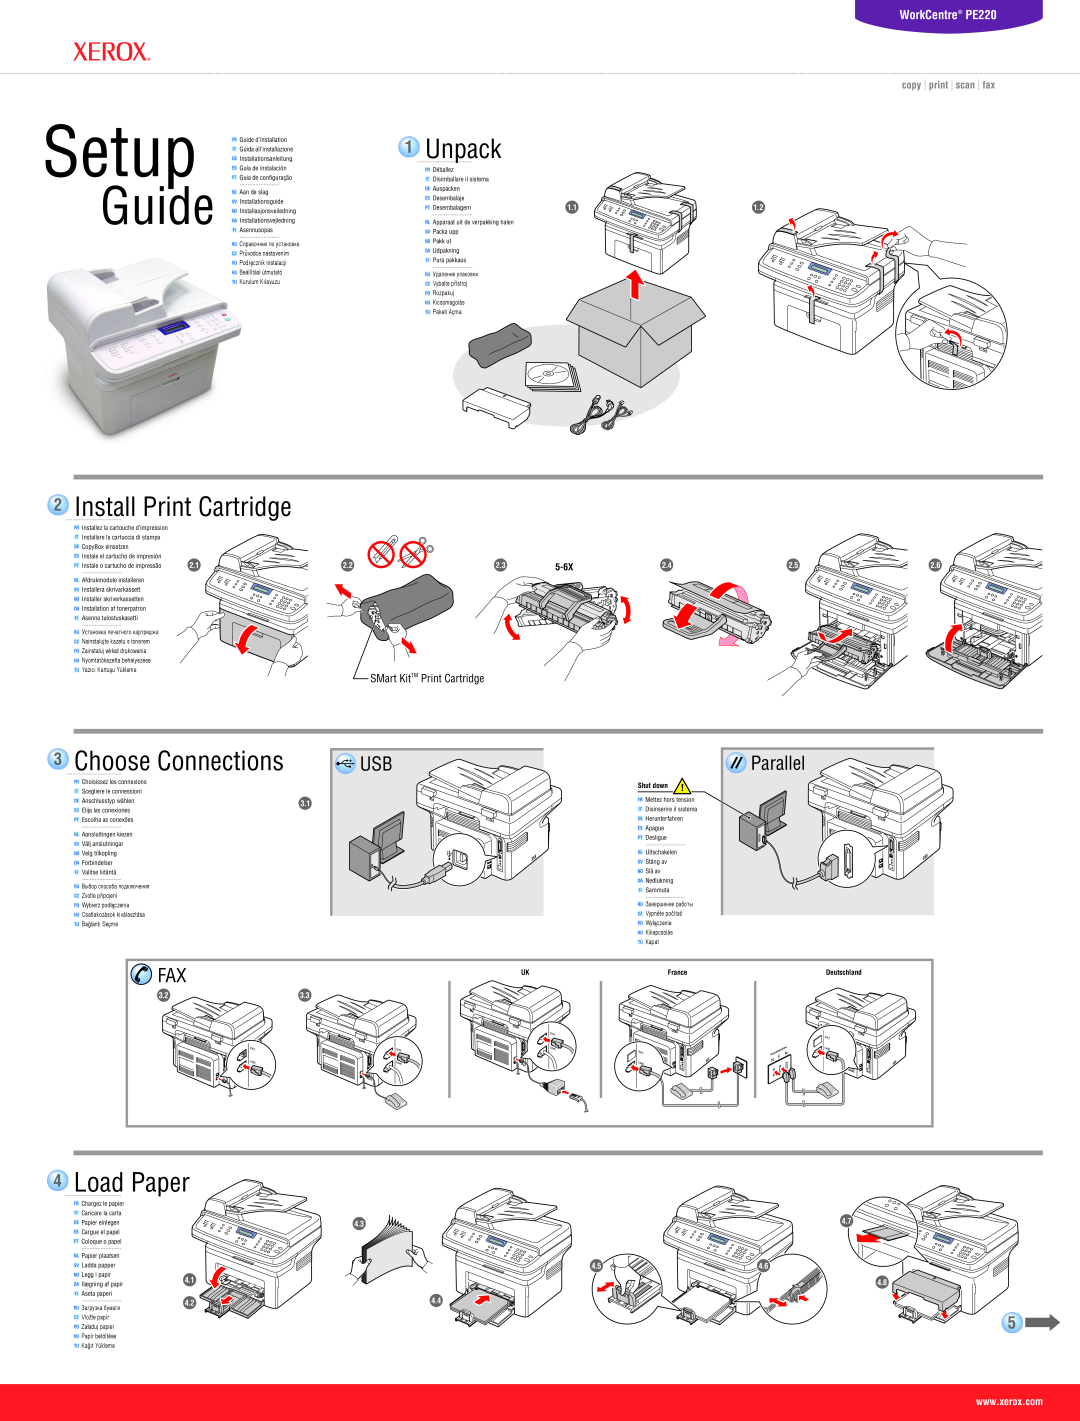 Xerox PE220 setup guide Unpack, Install Print Cartridge, Load Paper, Setup, Guide, Choose Connections, Parallel, 5-6X 